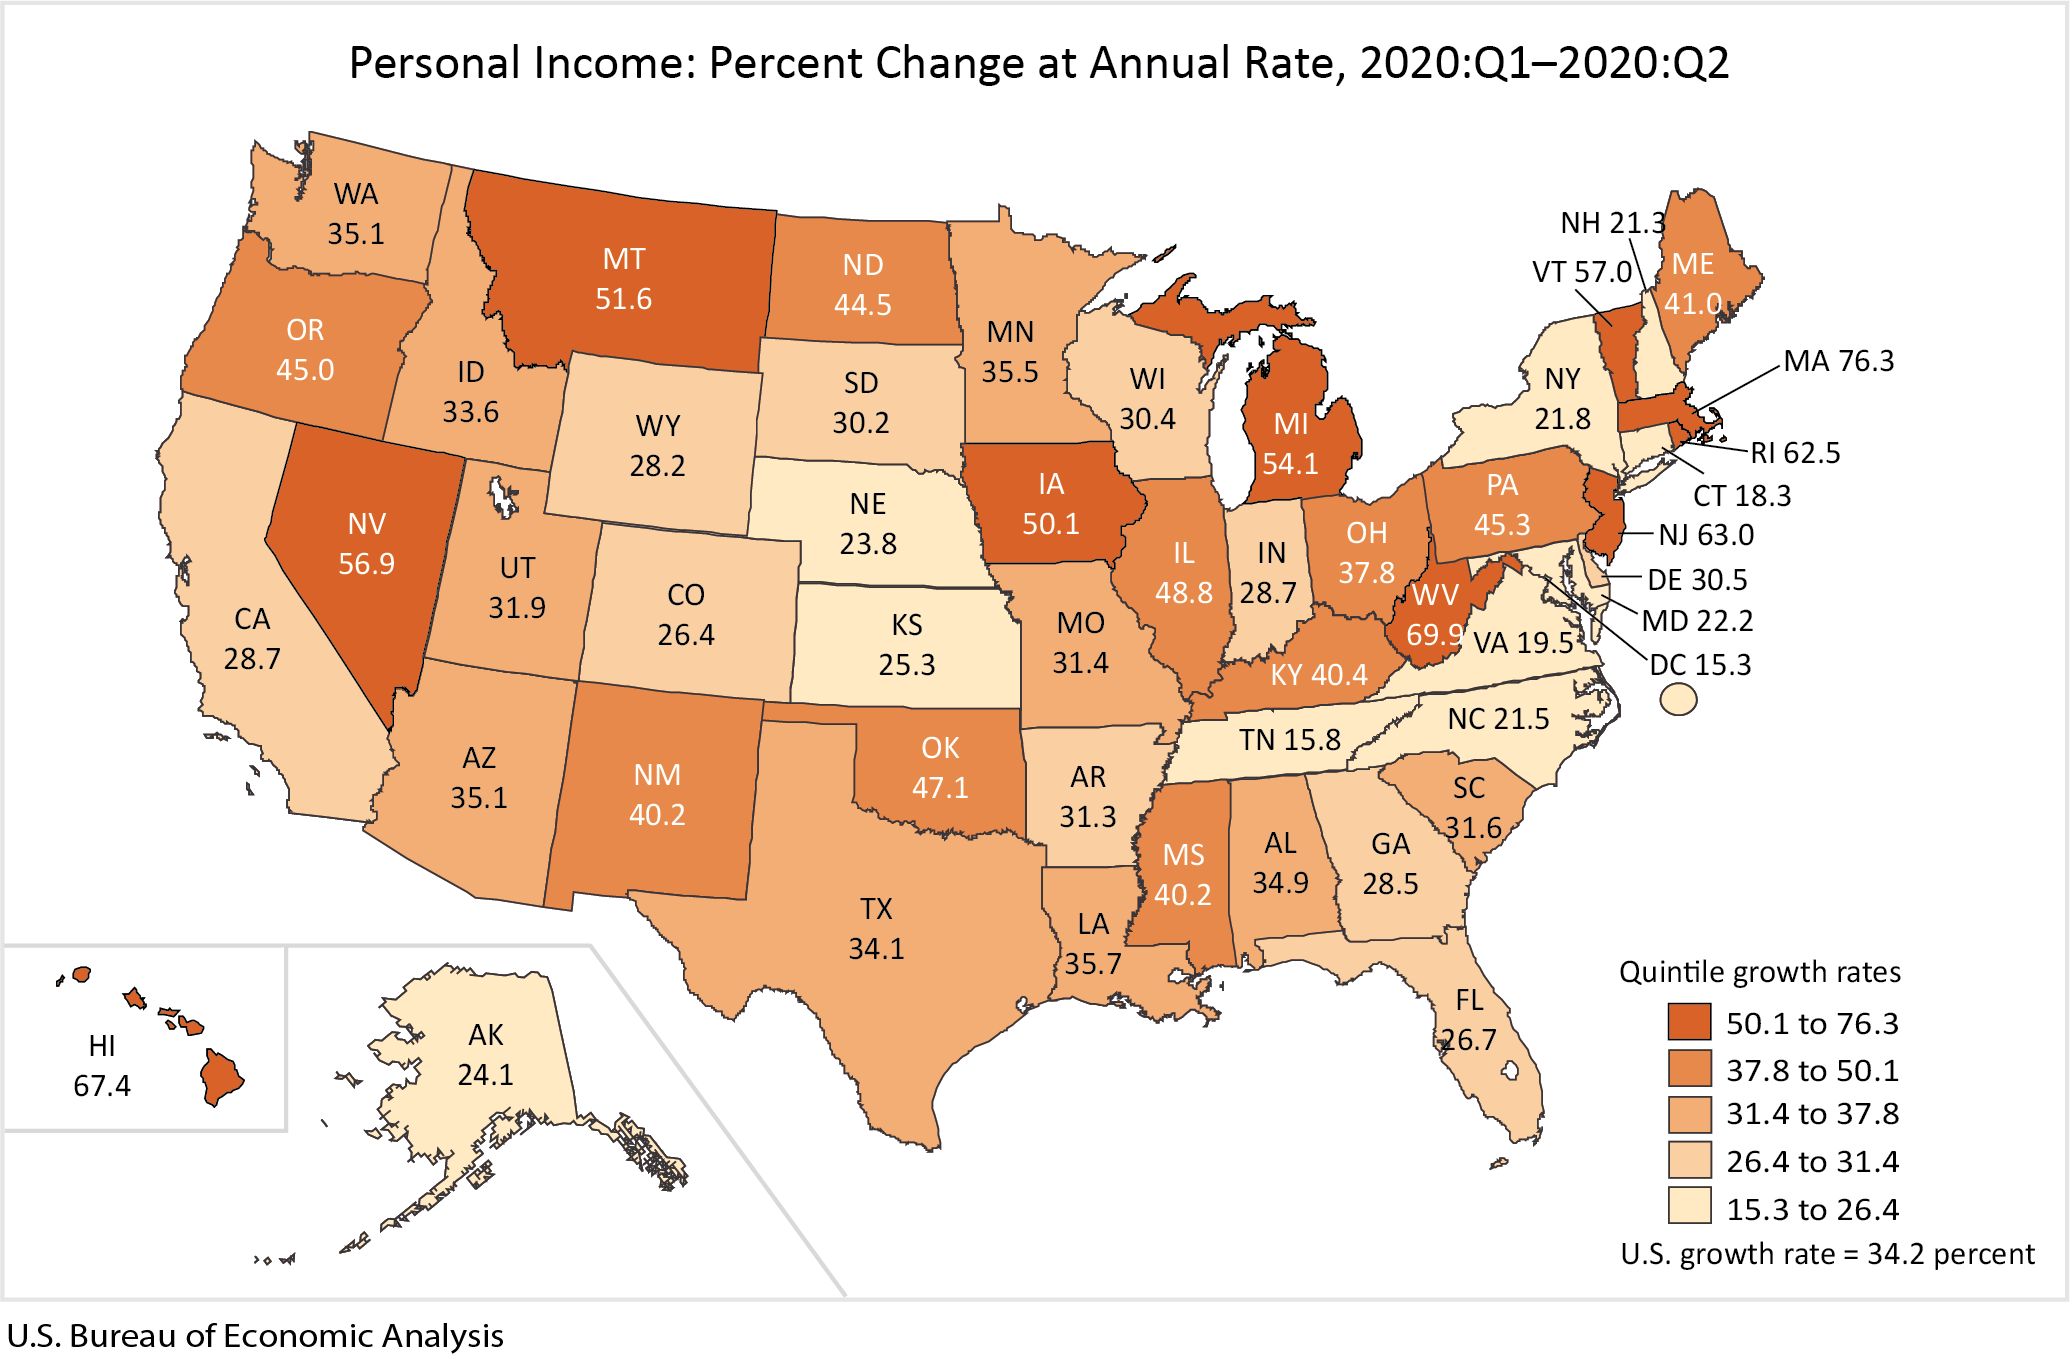  Personal Income: Percent Change at Annual Rate, 2020:Q1-2020-Q2